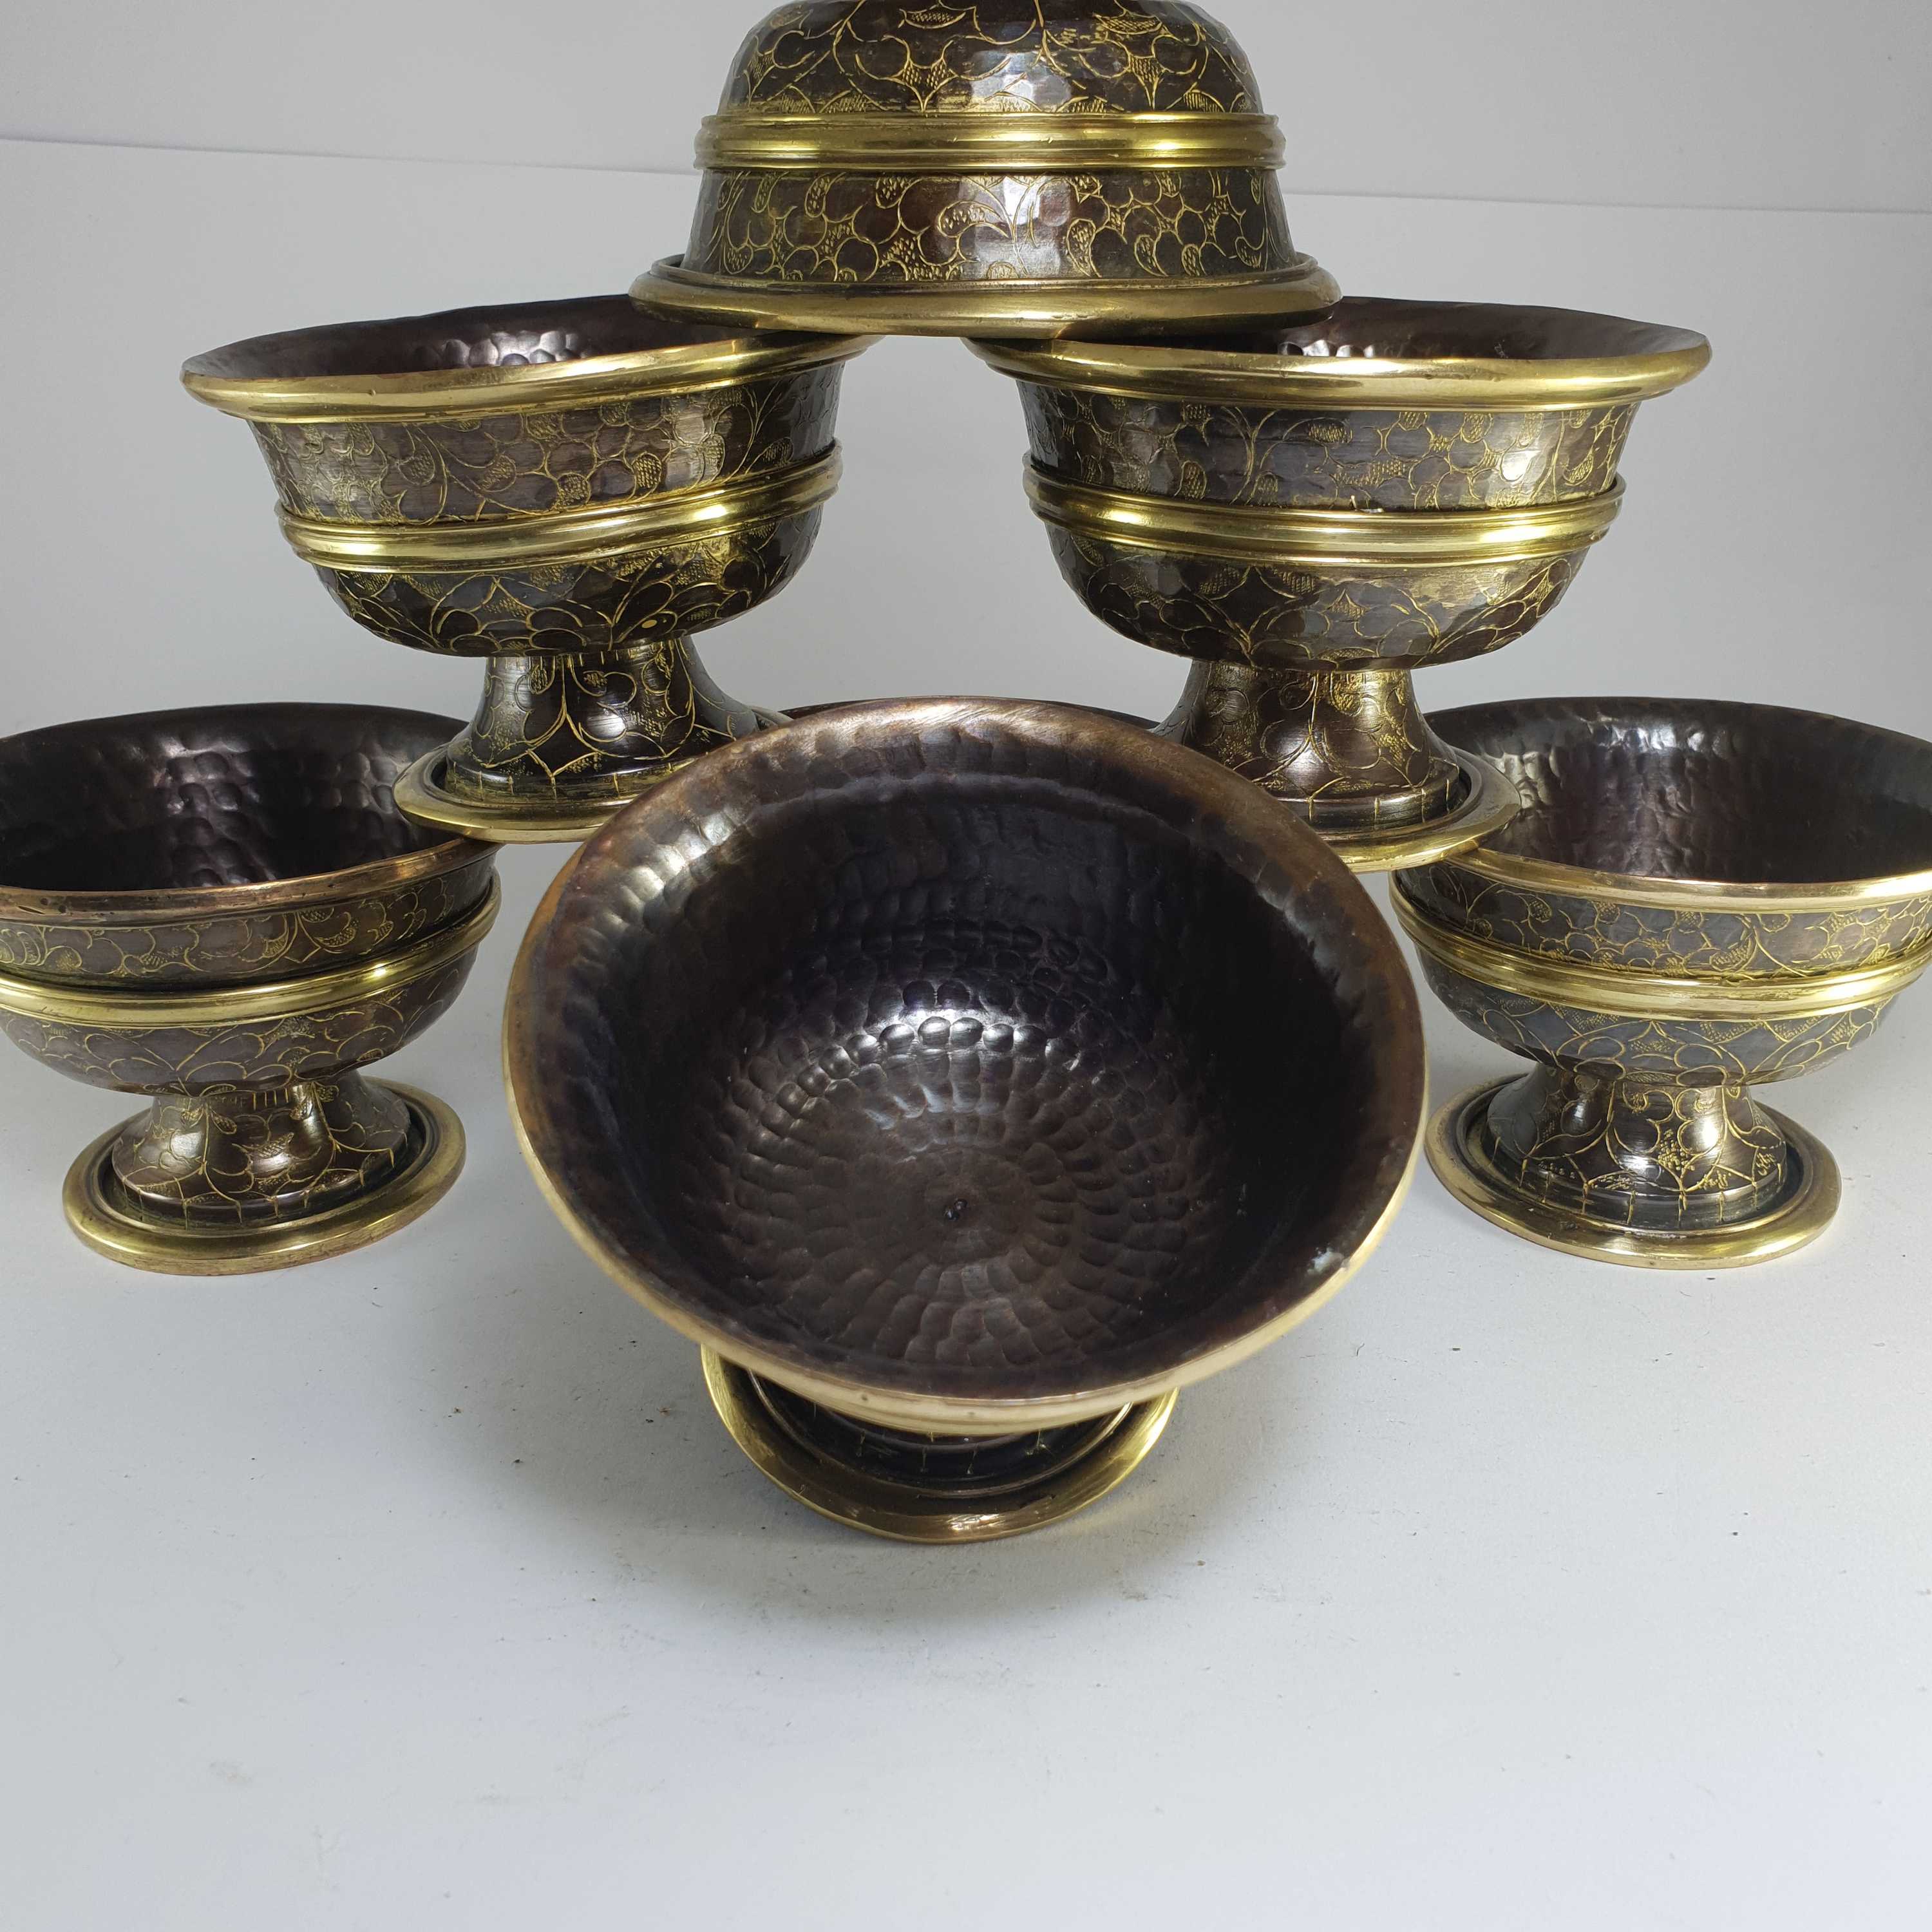 large Copper Offering Bowl With Stand And Hand Carving 7 Pcs Set, In Antique Finishing